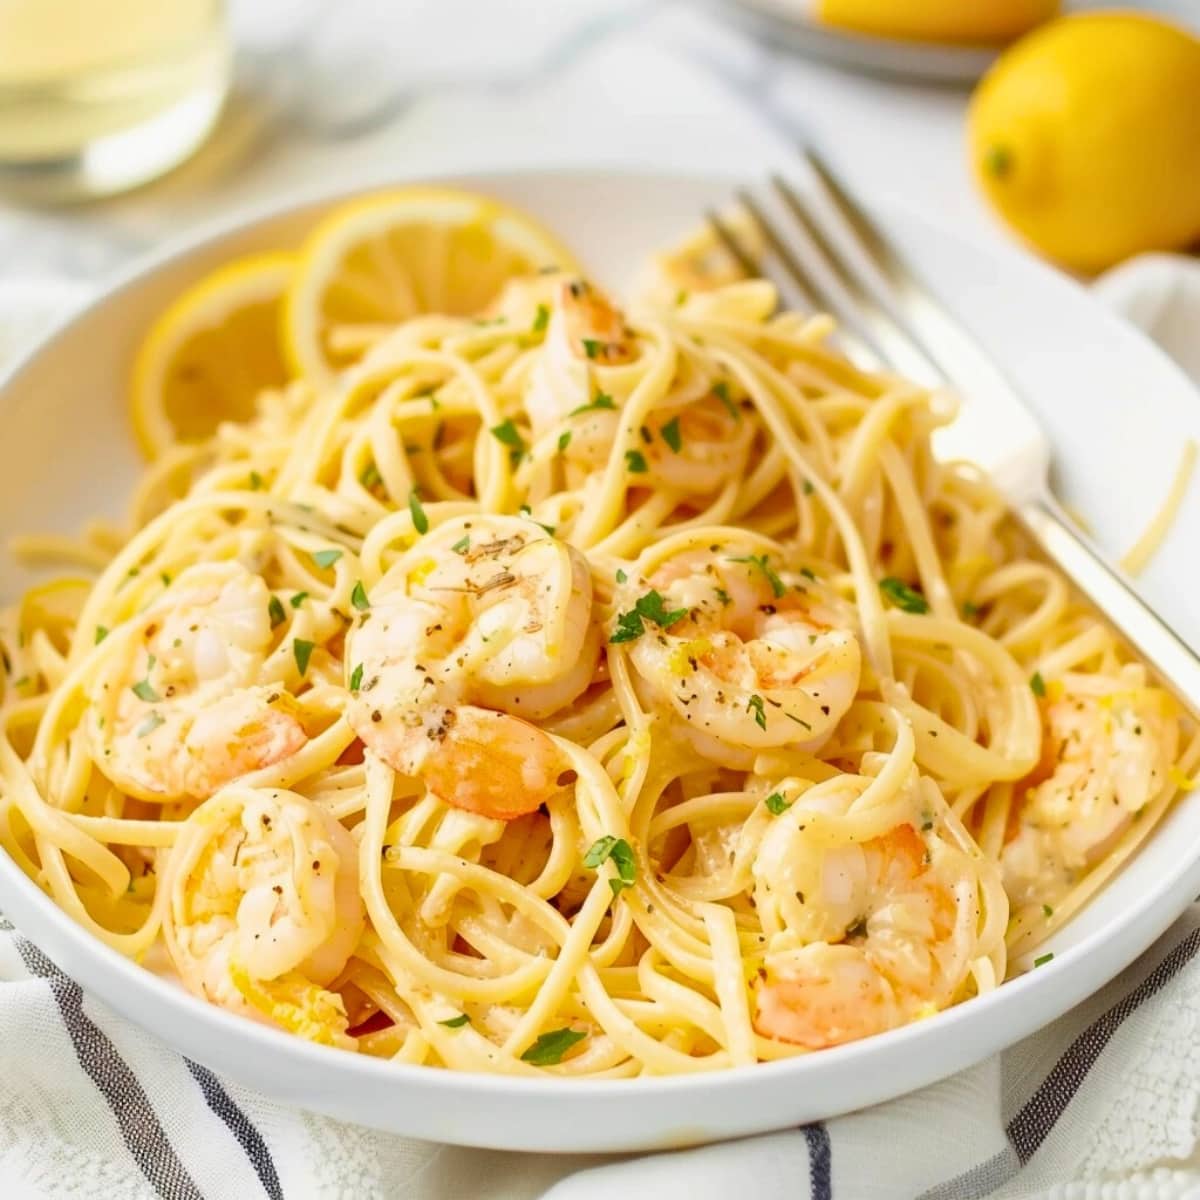 Creamy lemon shrimp pasta in a bowl with fork.